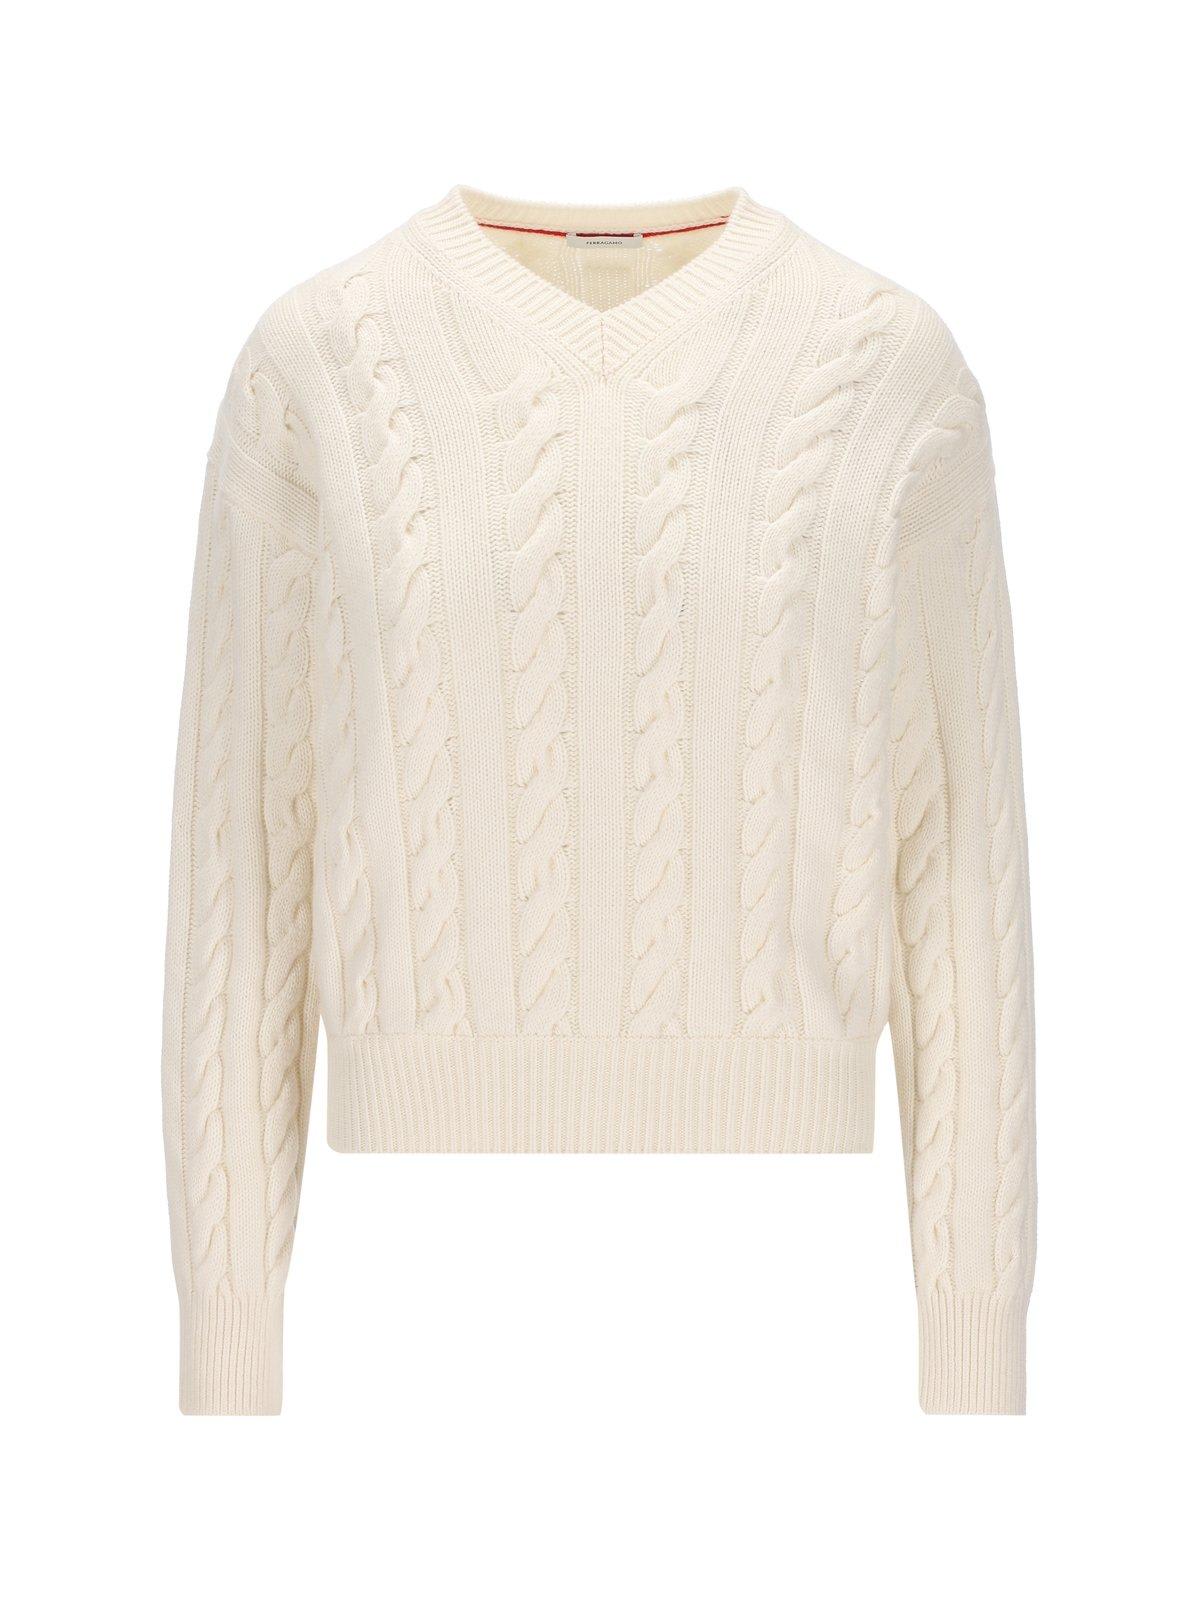 FERRAGAMO CABLE KNITTED V-NECK SWEATER